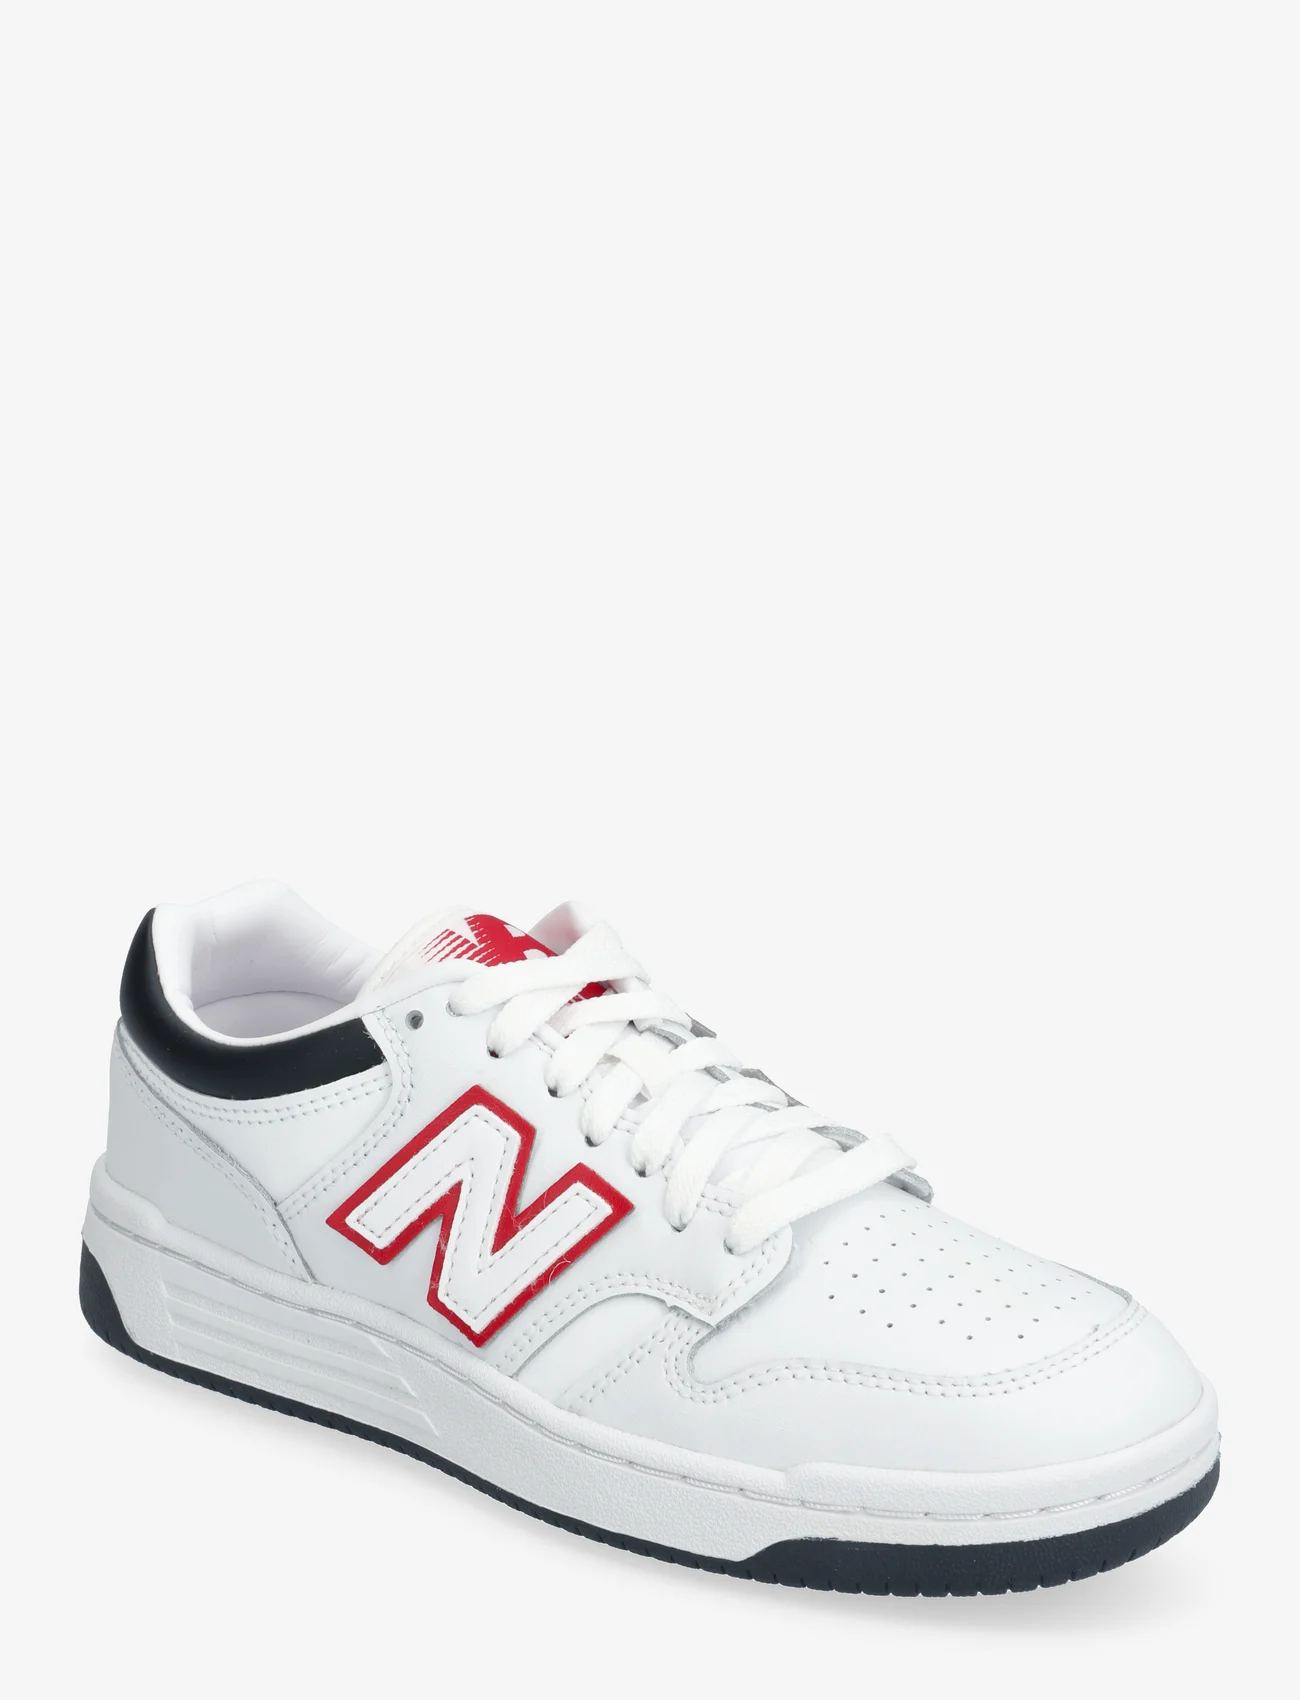 New Balance - New Balance BB480 - low top sneakers - white/navy - 0